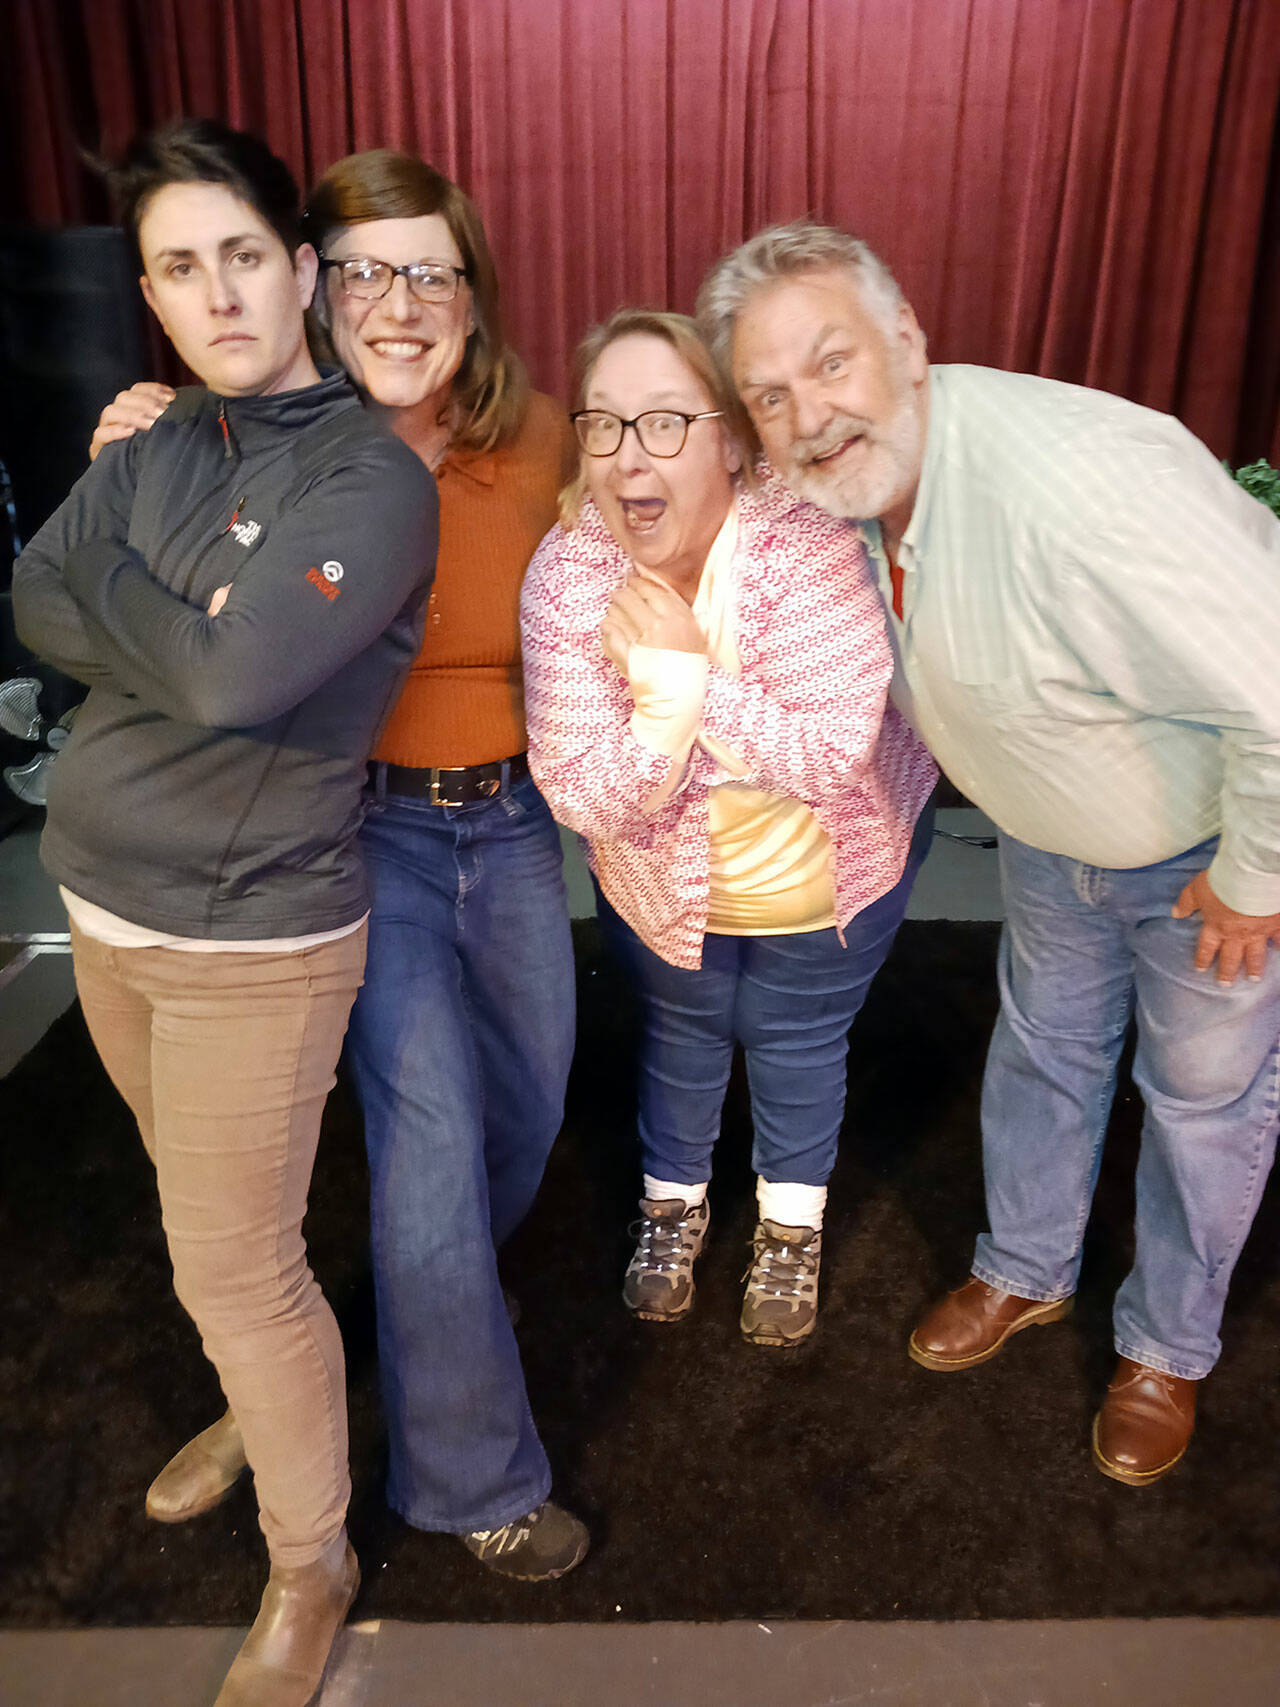 From left to right, Shaina Lent, Cat White, Marva Holmes and Mark Valentine along with Sarah Tucker, who is not pictured, make up the Improv Without A Net Troupe.